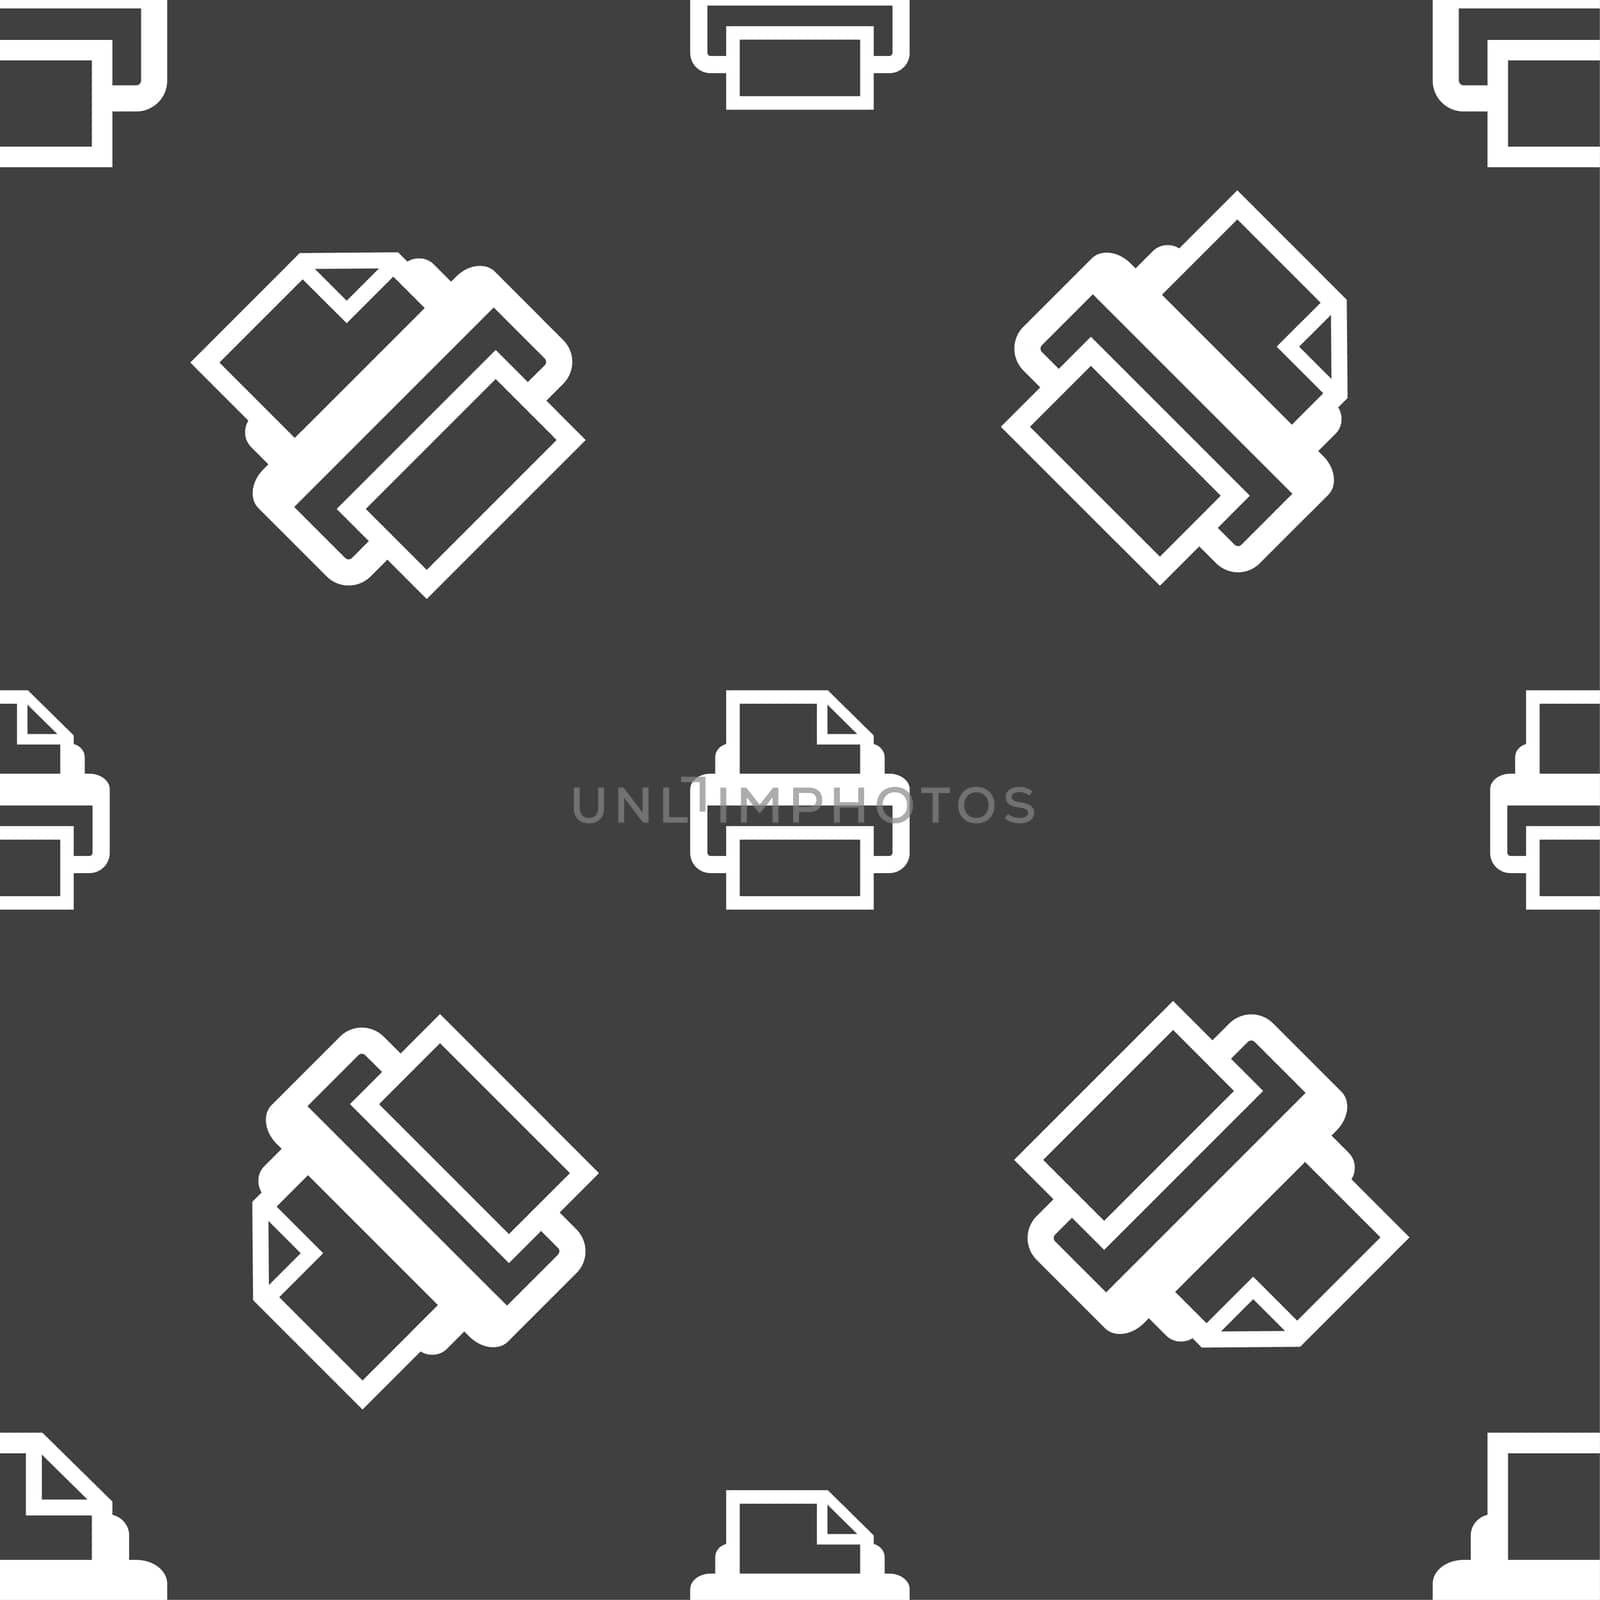 Print sign icon. Printing symbol. Seamless pattern on a gray background. illustration